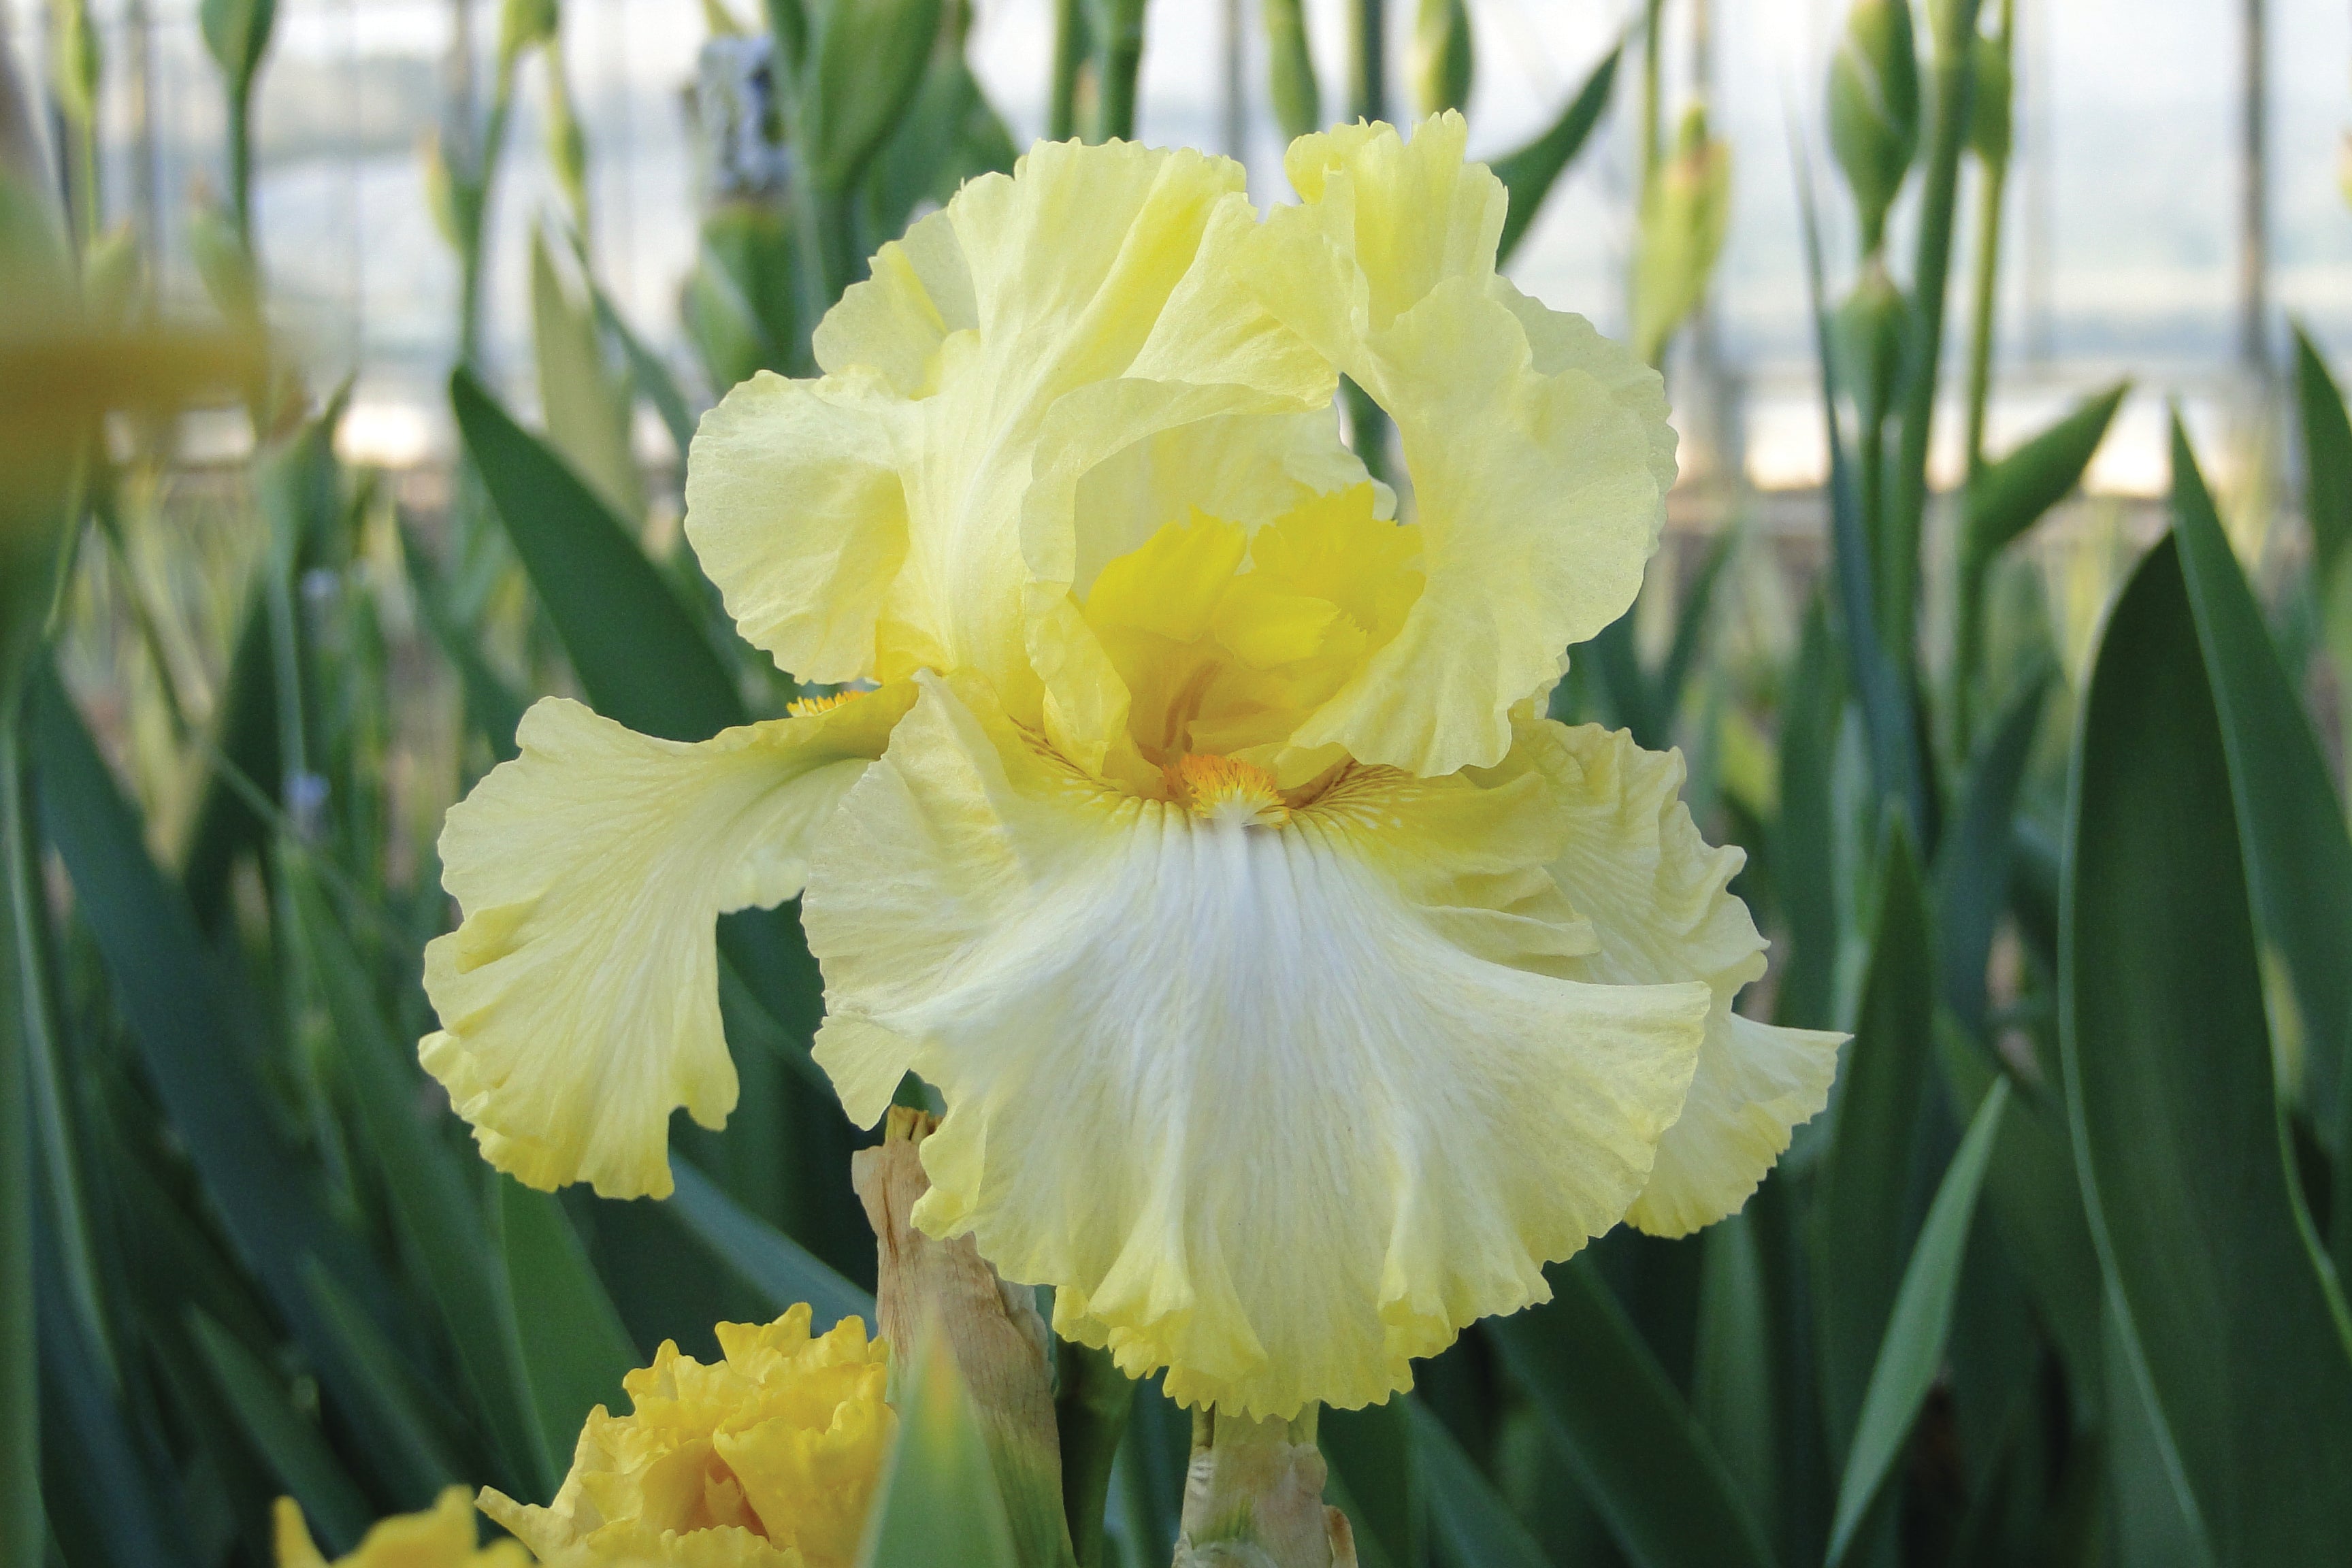 Iris germanica Summer Olympics Image Credit: Ball Horticulture Company